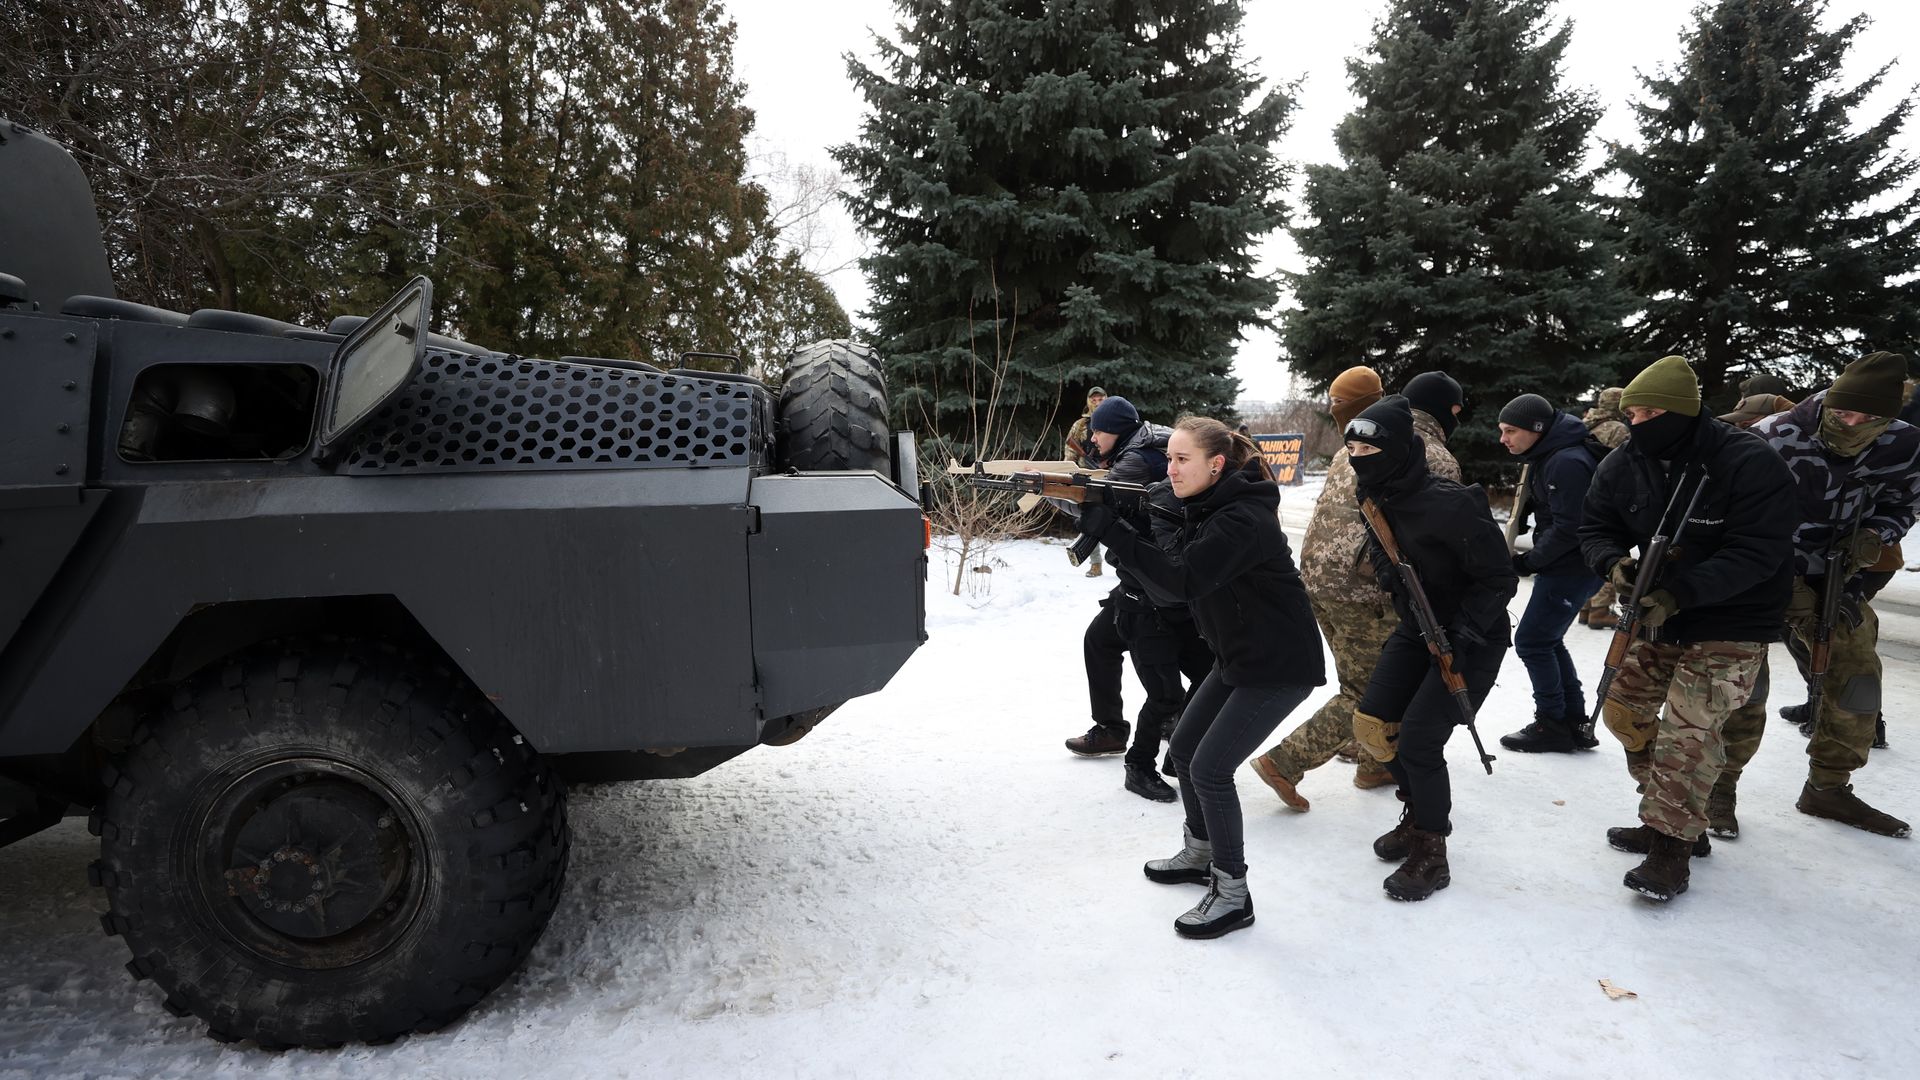 Civilians are seen training in early February to be part of Ukraine's defense force.